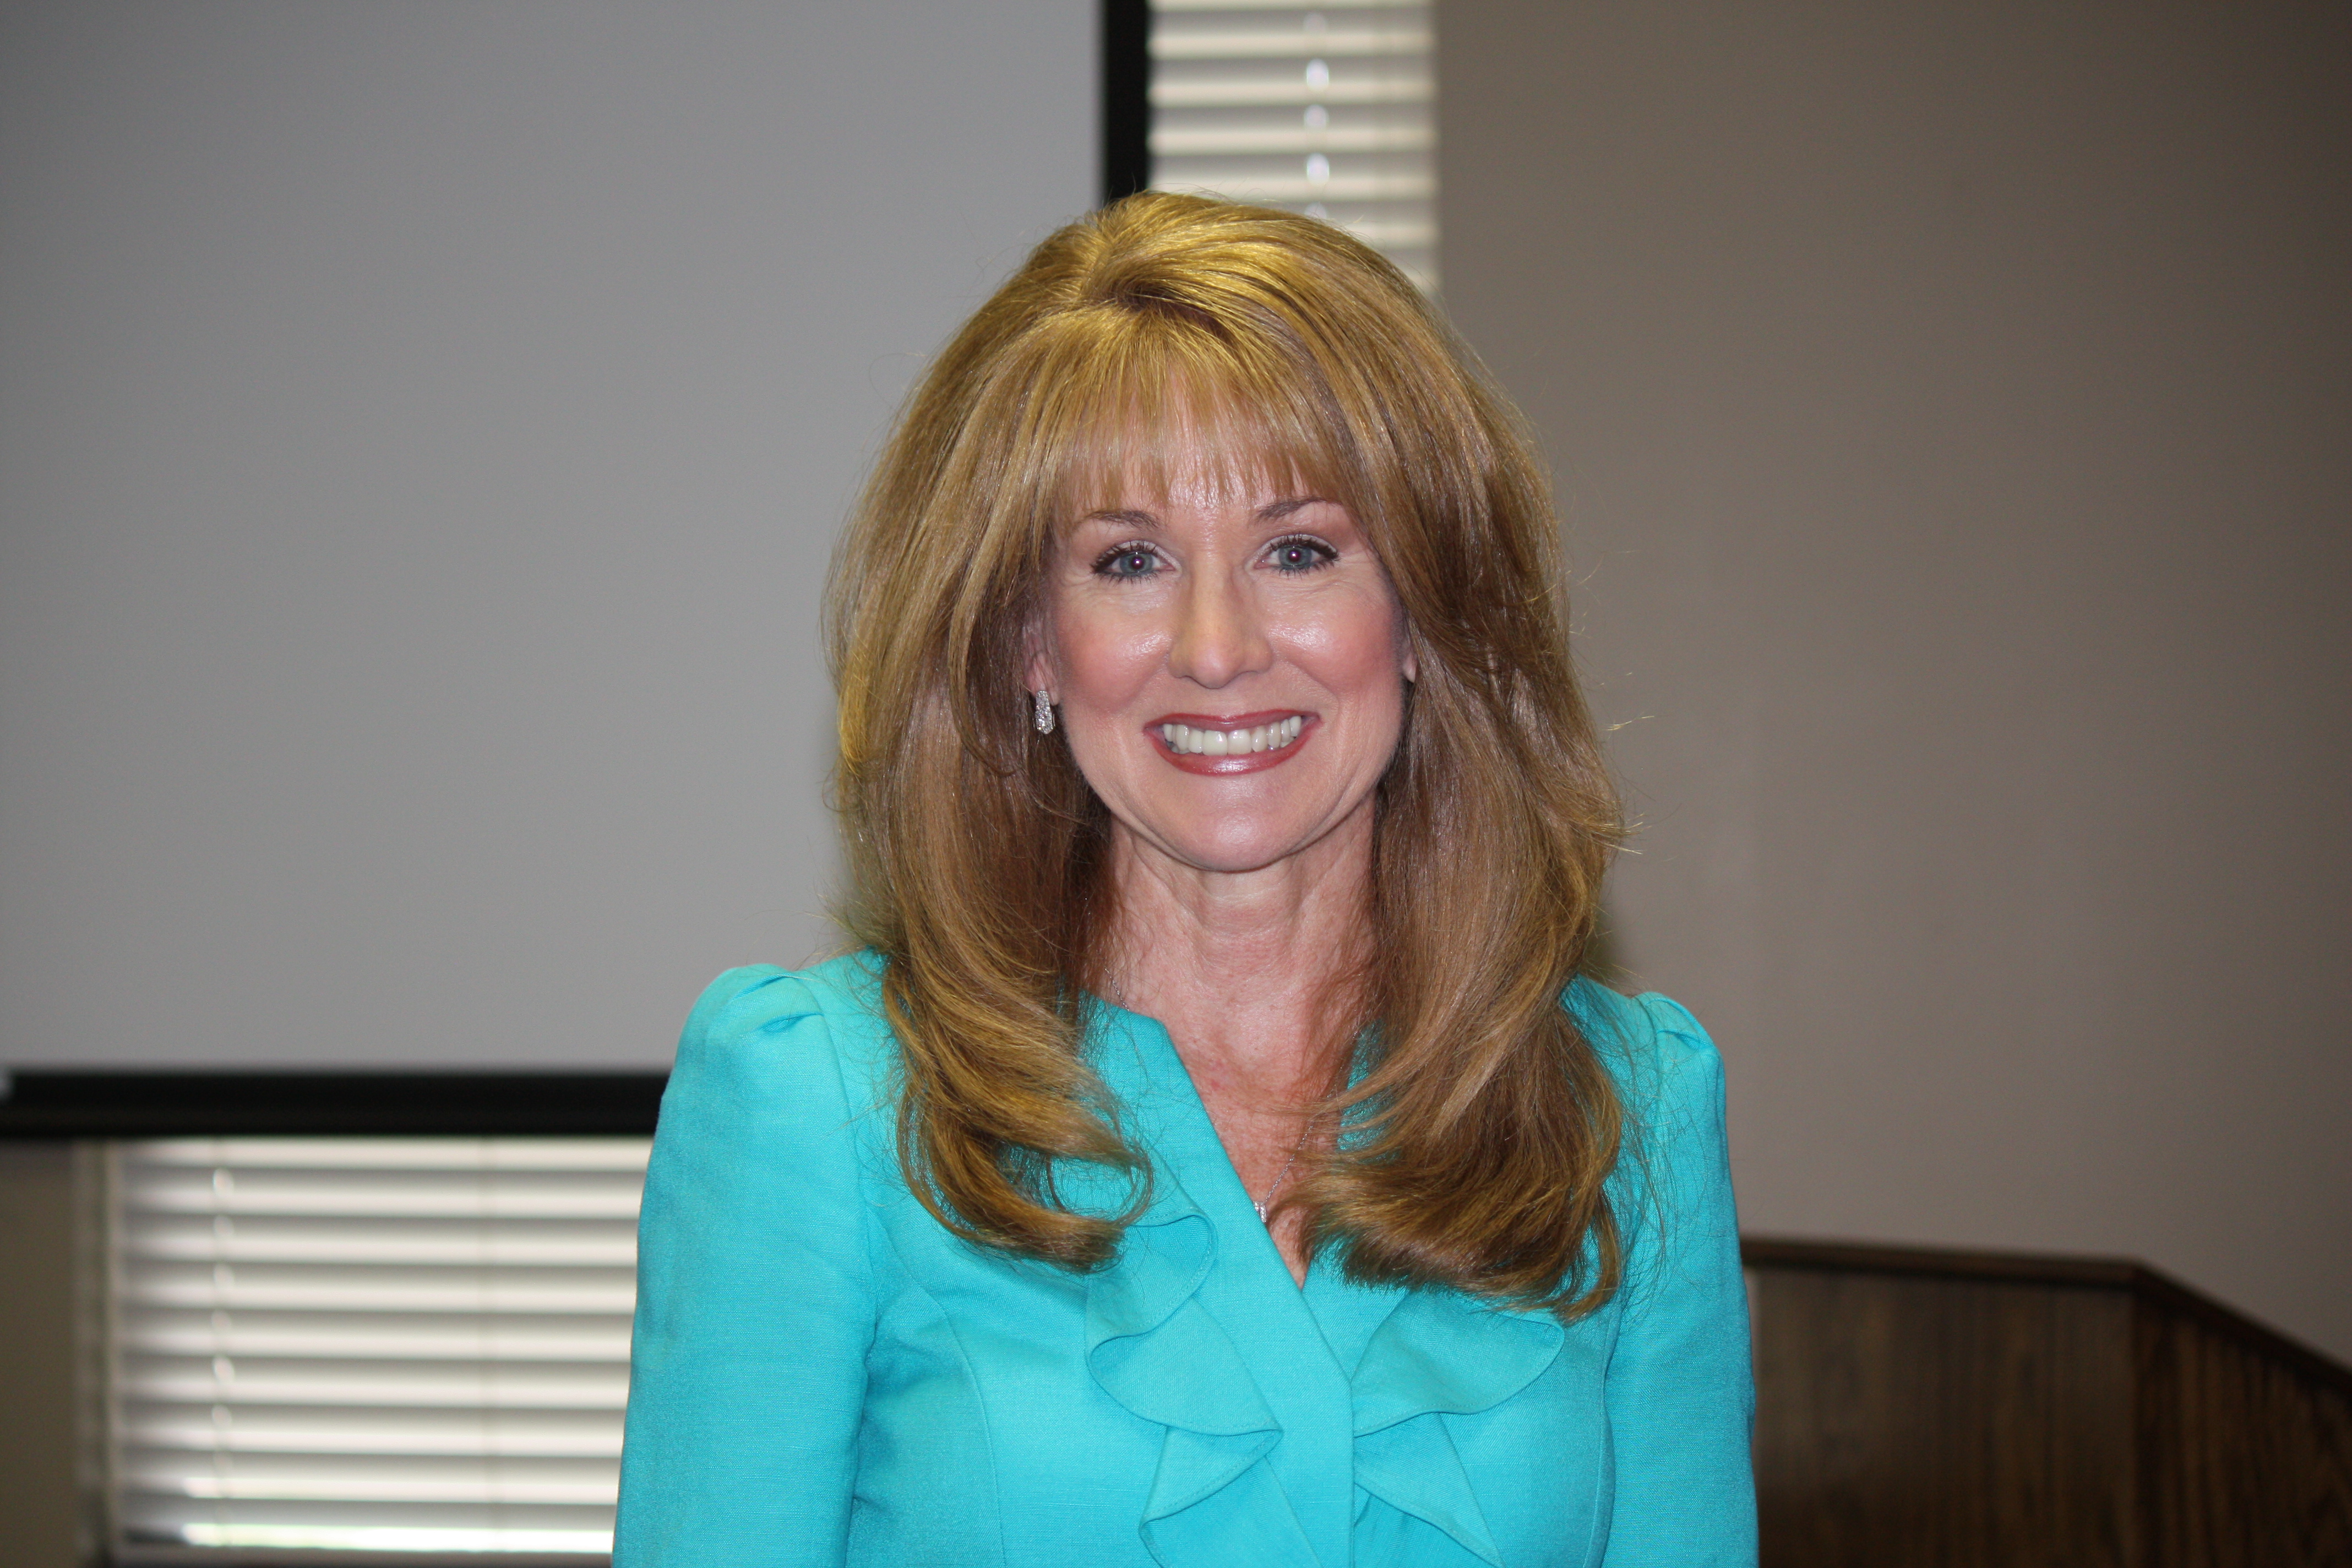 Neill to address Trussville Area Chamber of Commerce